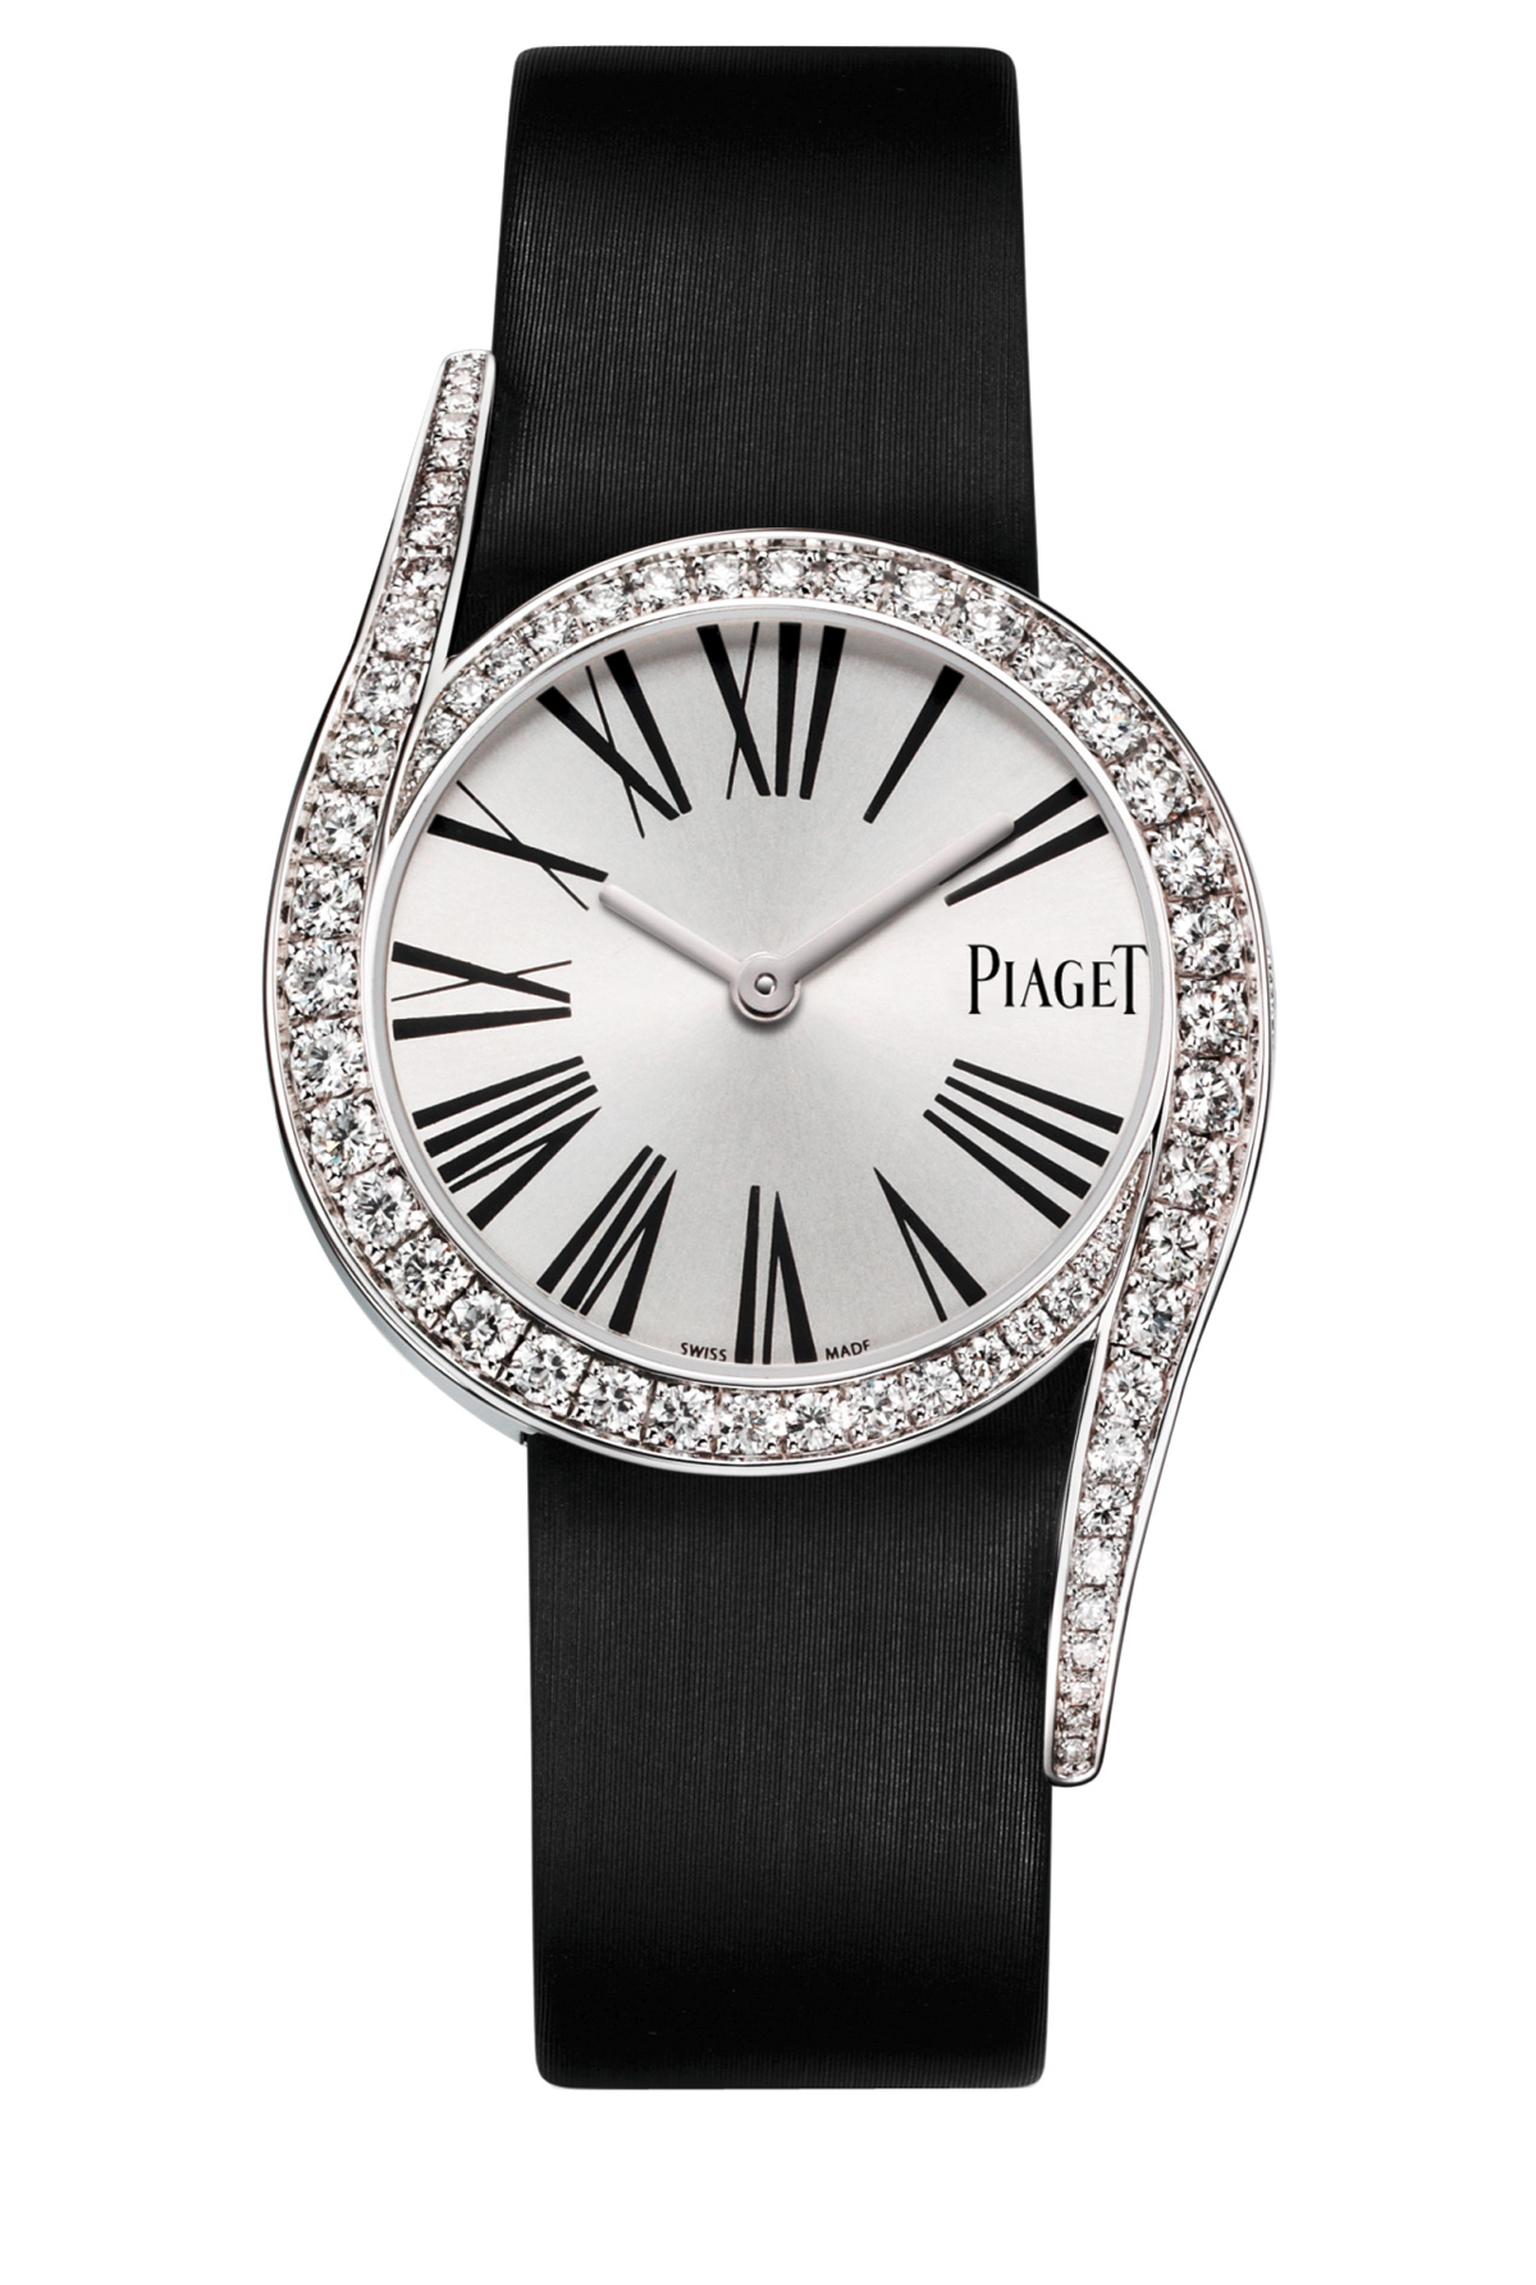 Piaget Limelight Gala_20130919_Zoom